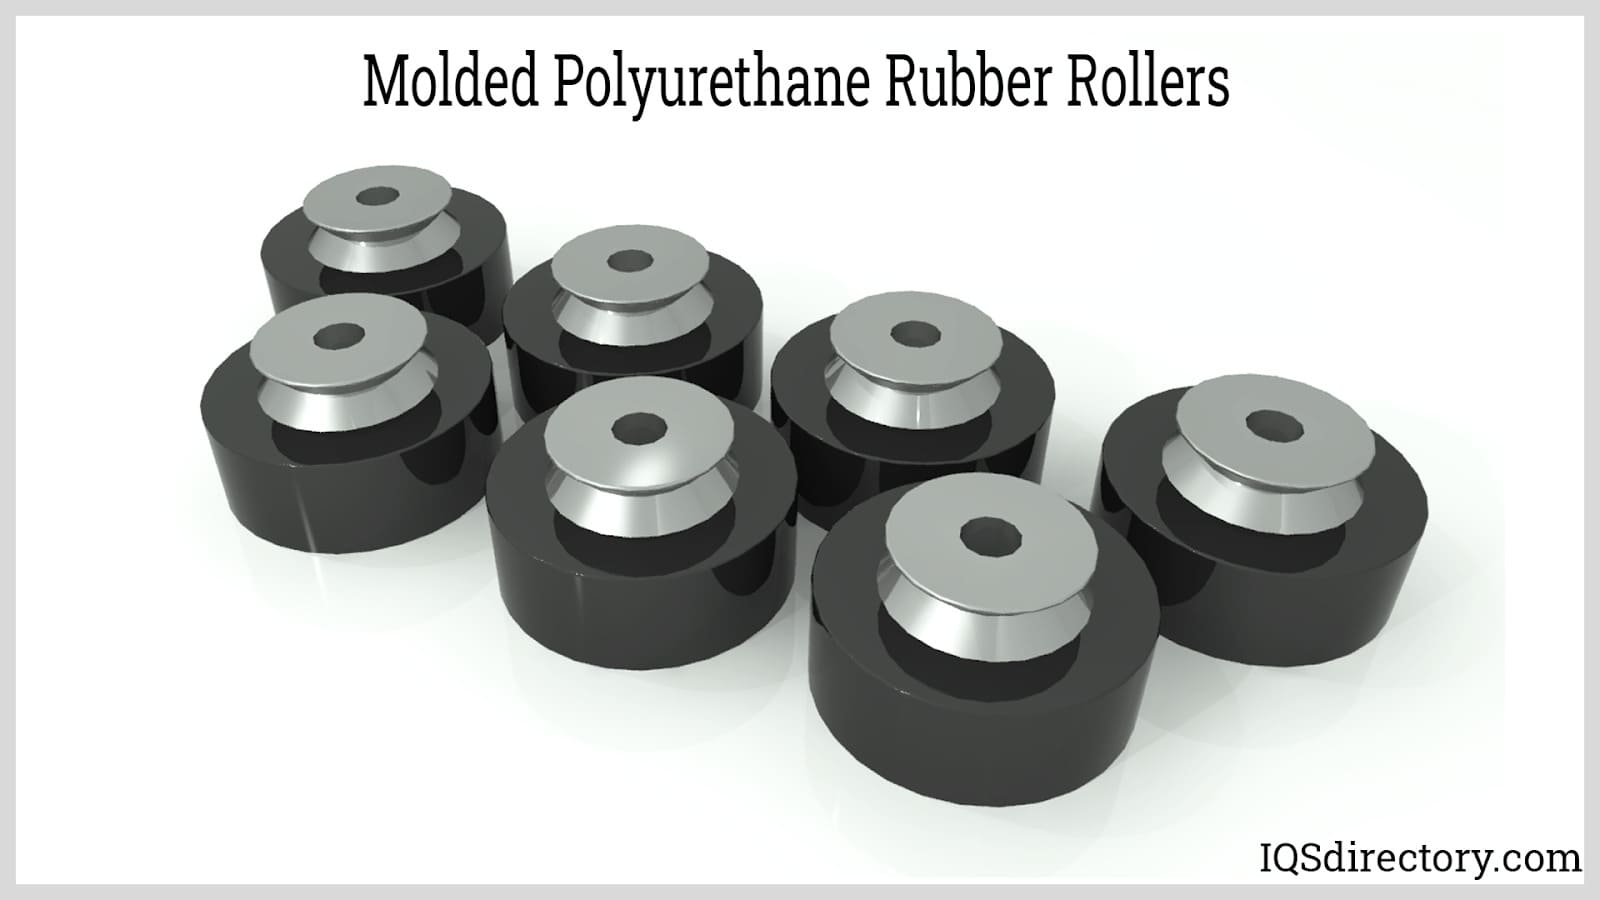 Molded Polyurethane Rubber Rollers